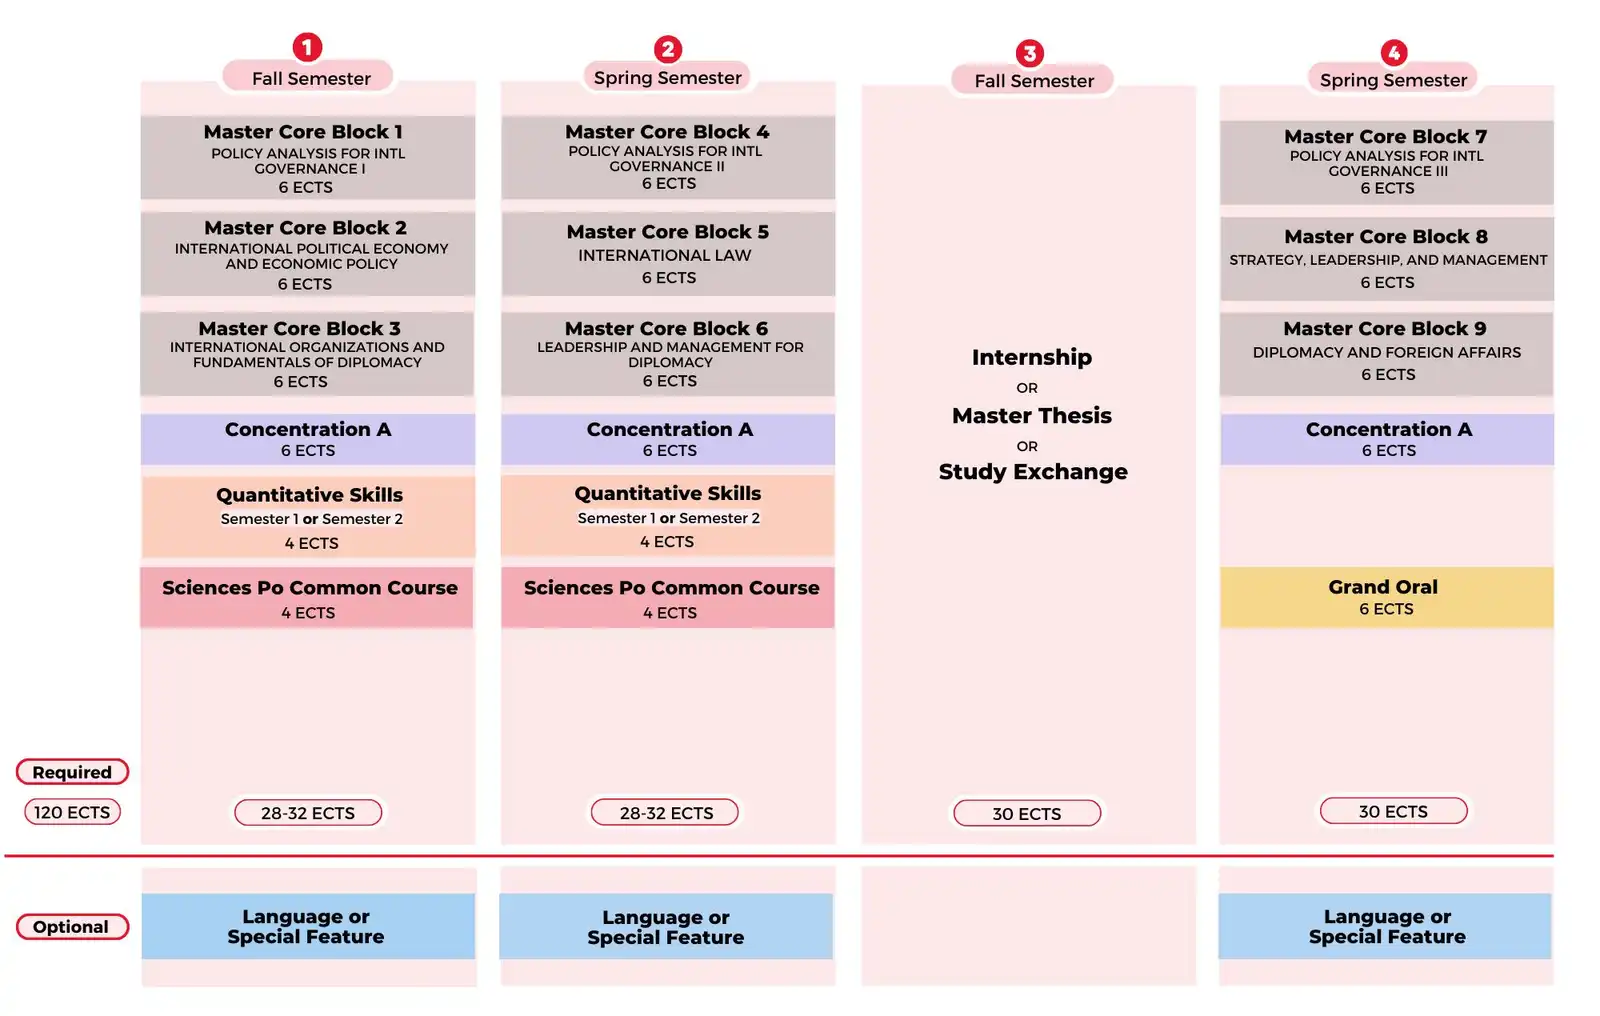 Programme structure of the Master in International Governance and Diplomacy